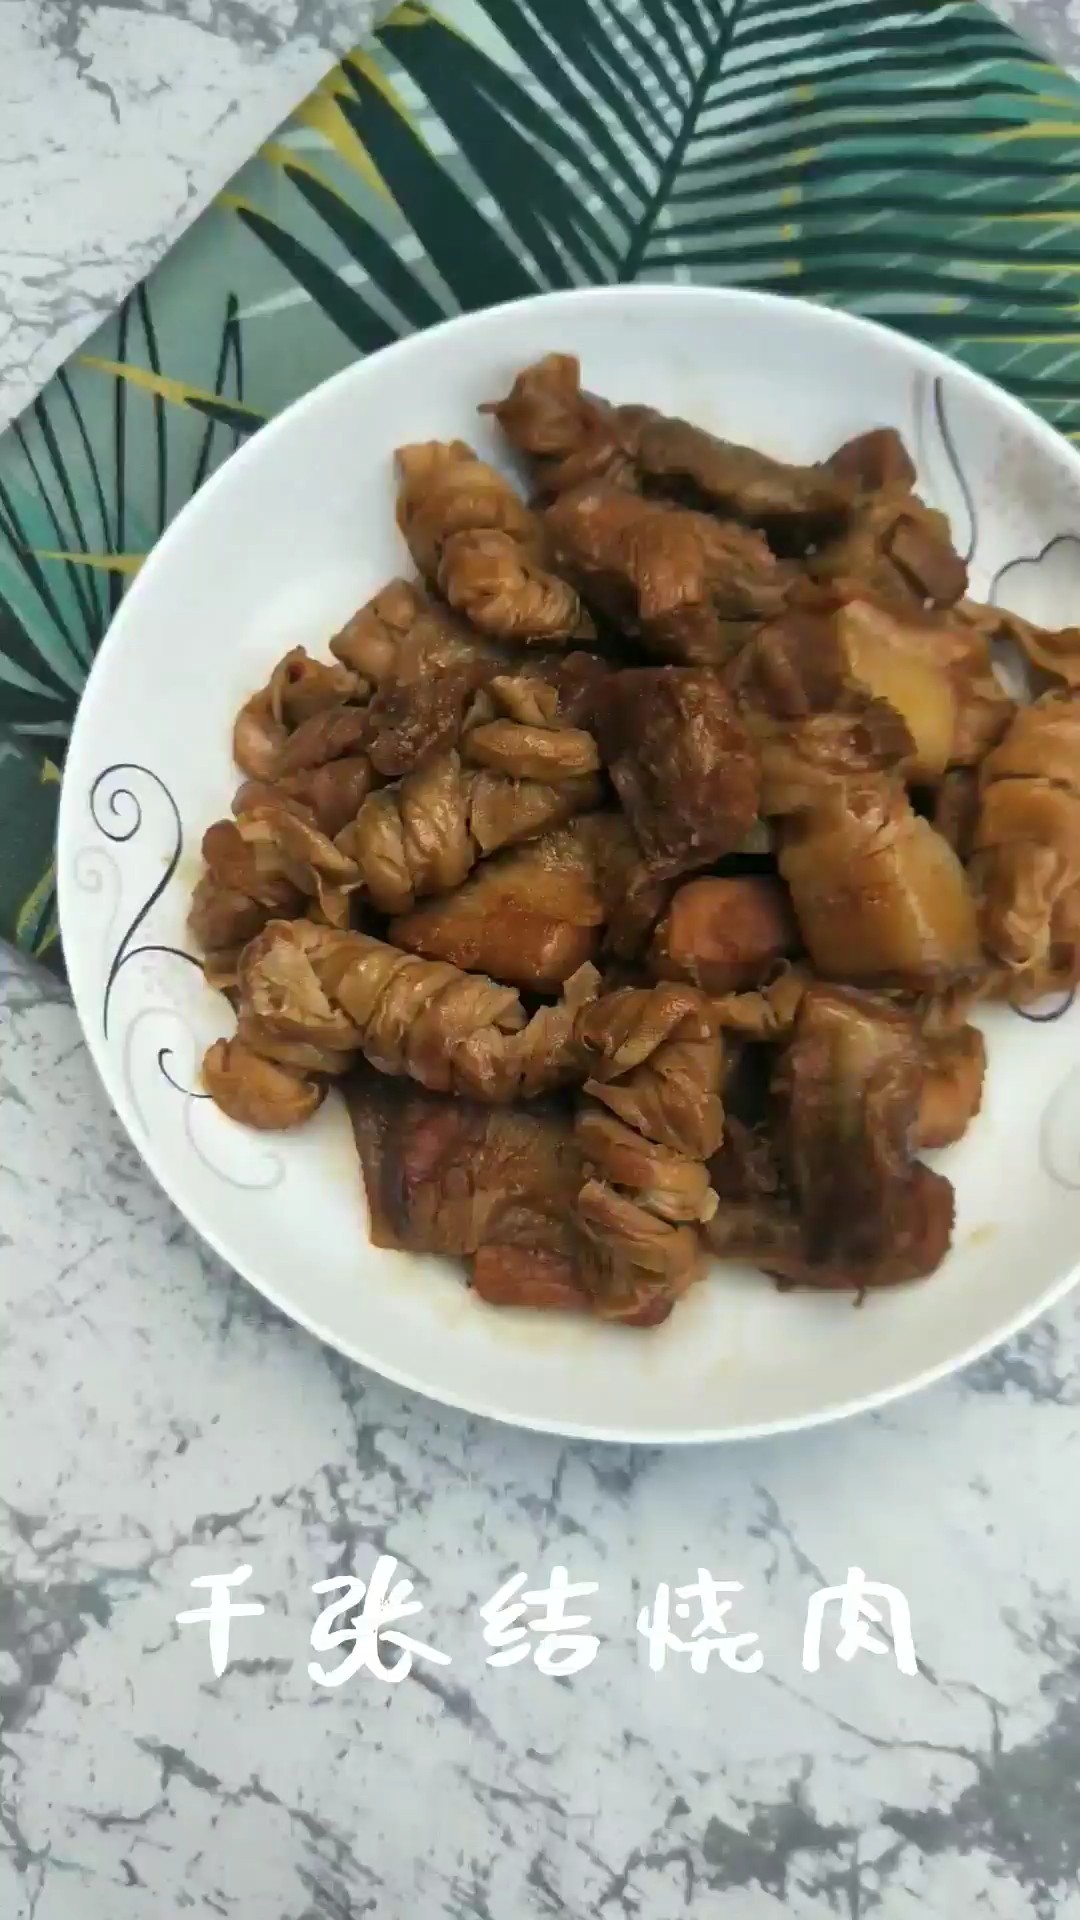 Thousand Sheets of Roasted Meat recipe